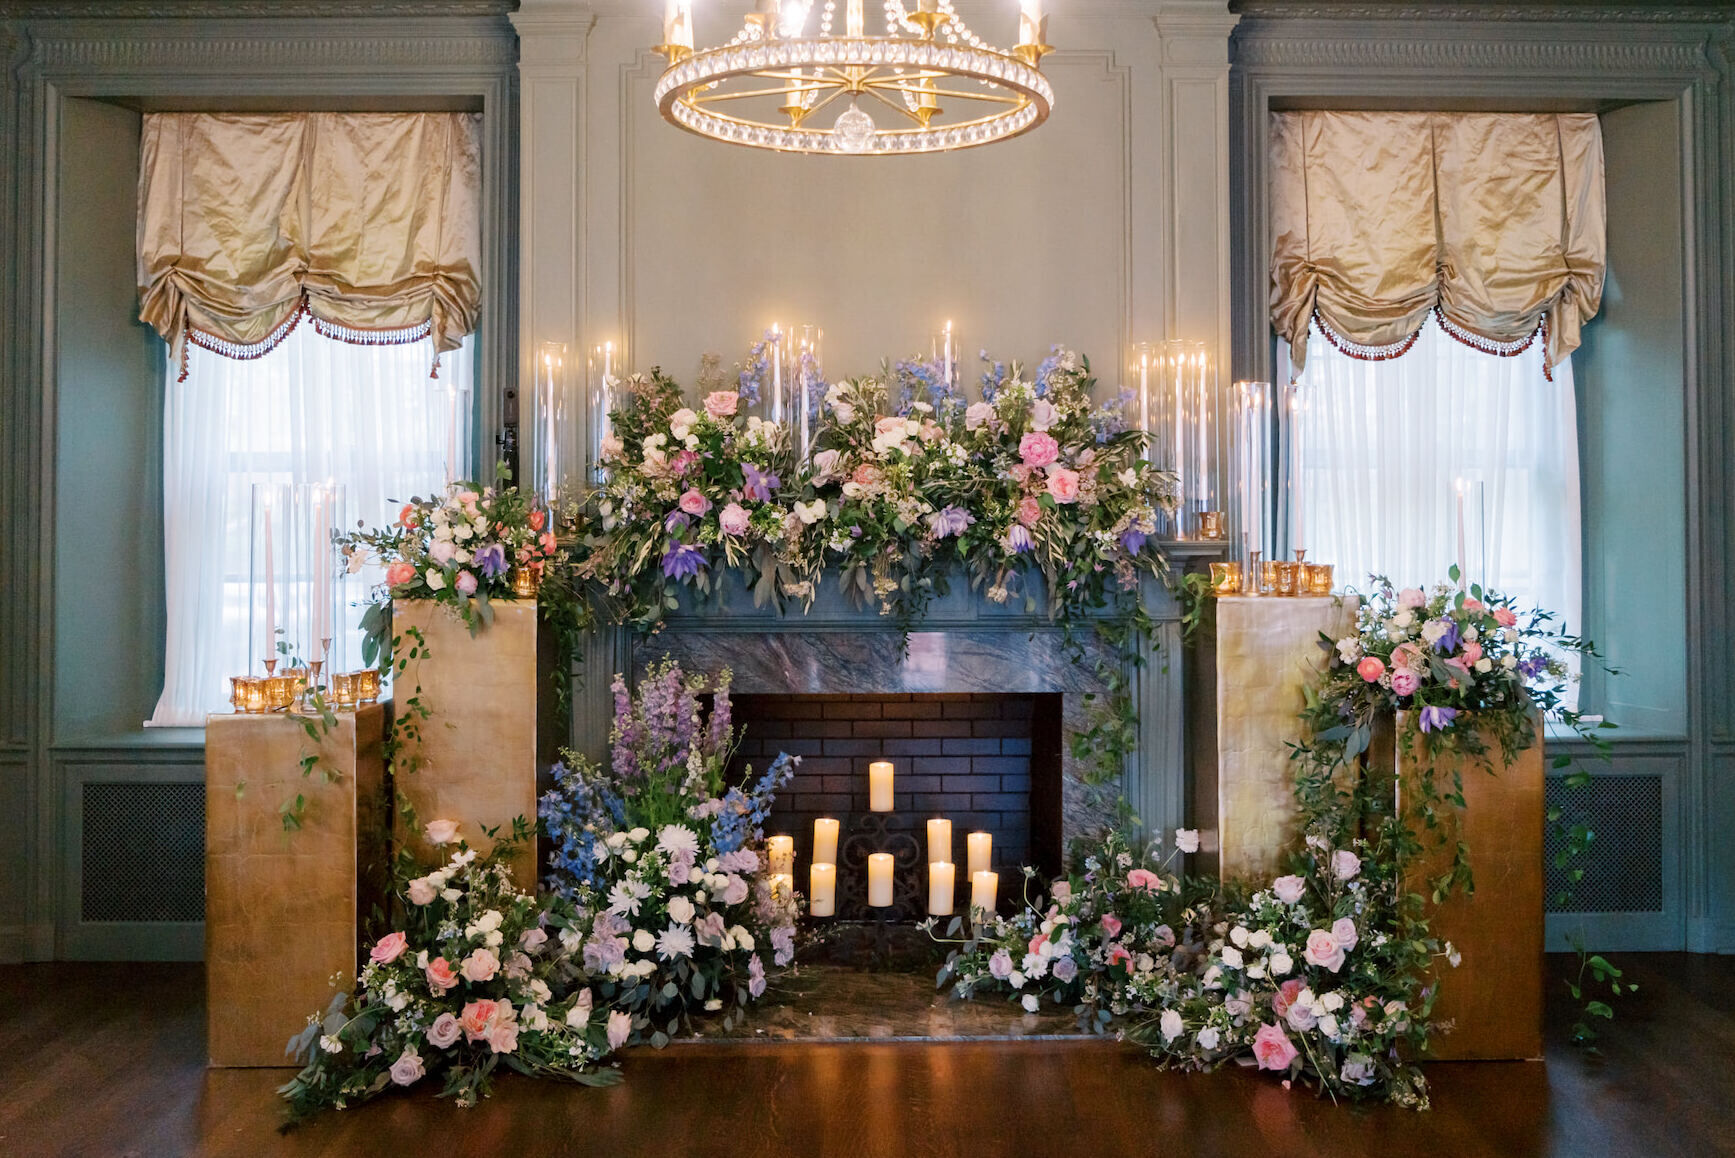 A fireplace decorated with pink and blue flowers for an at-home wedding ceremony.